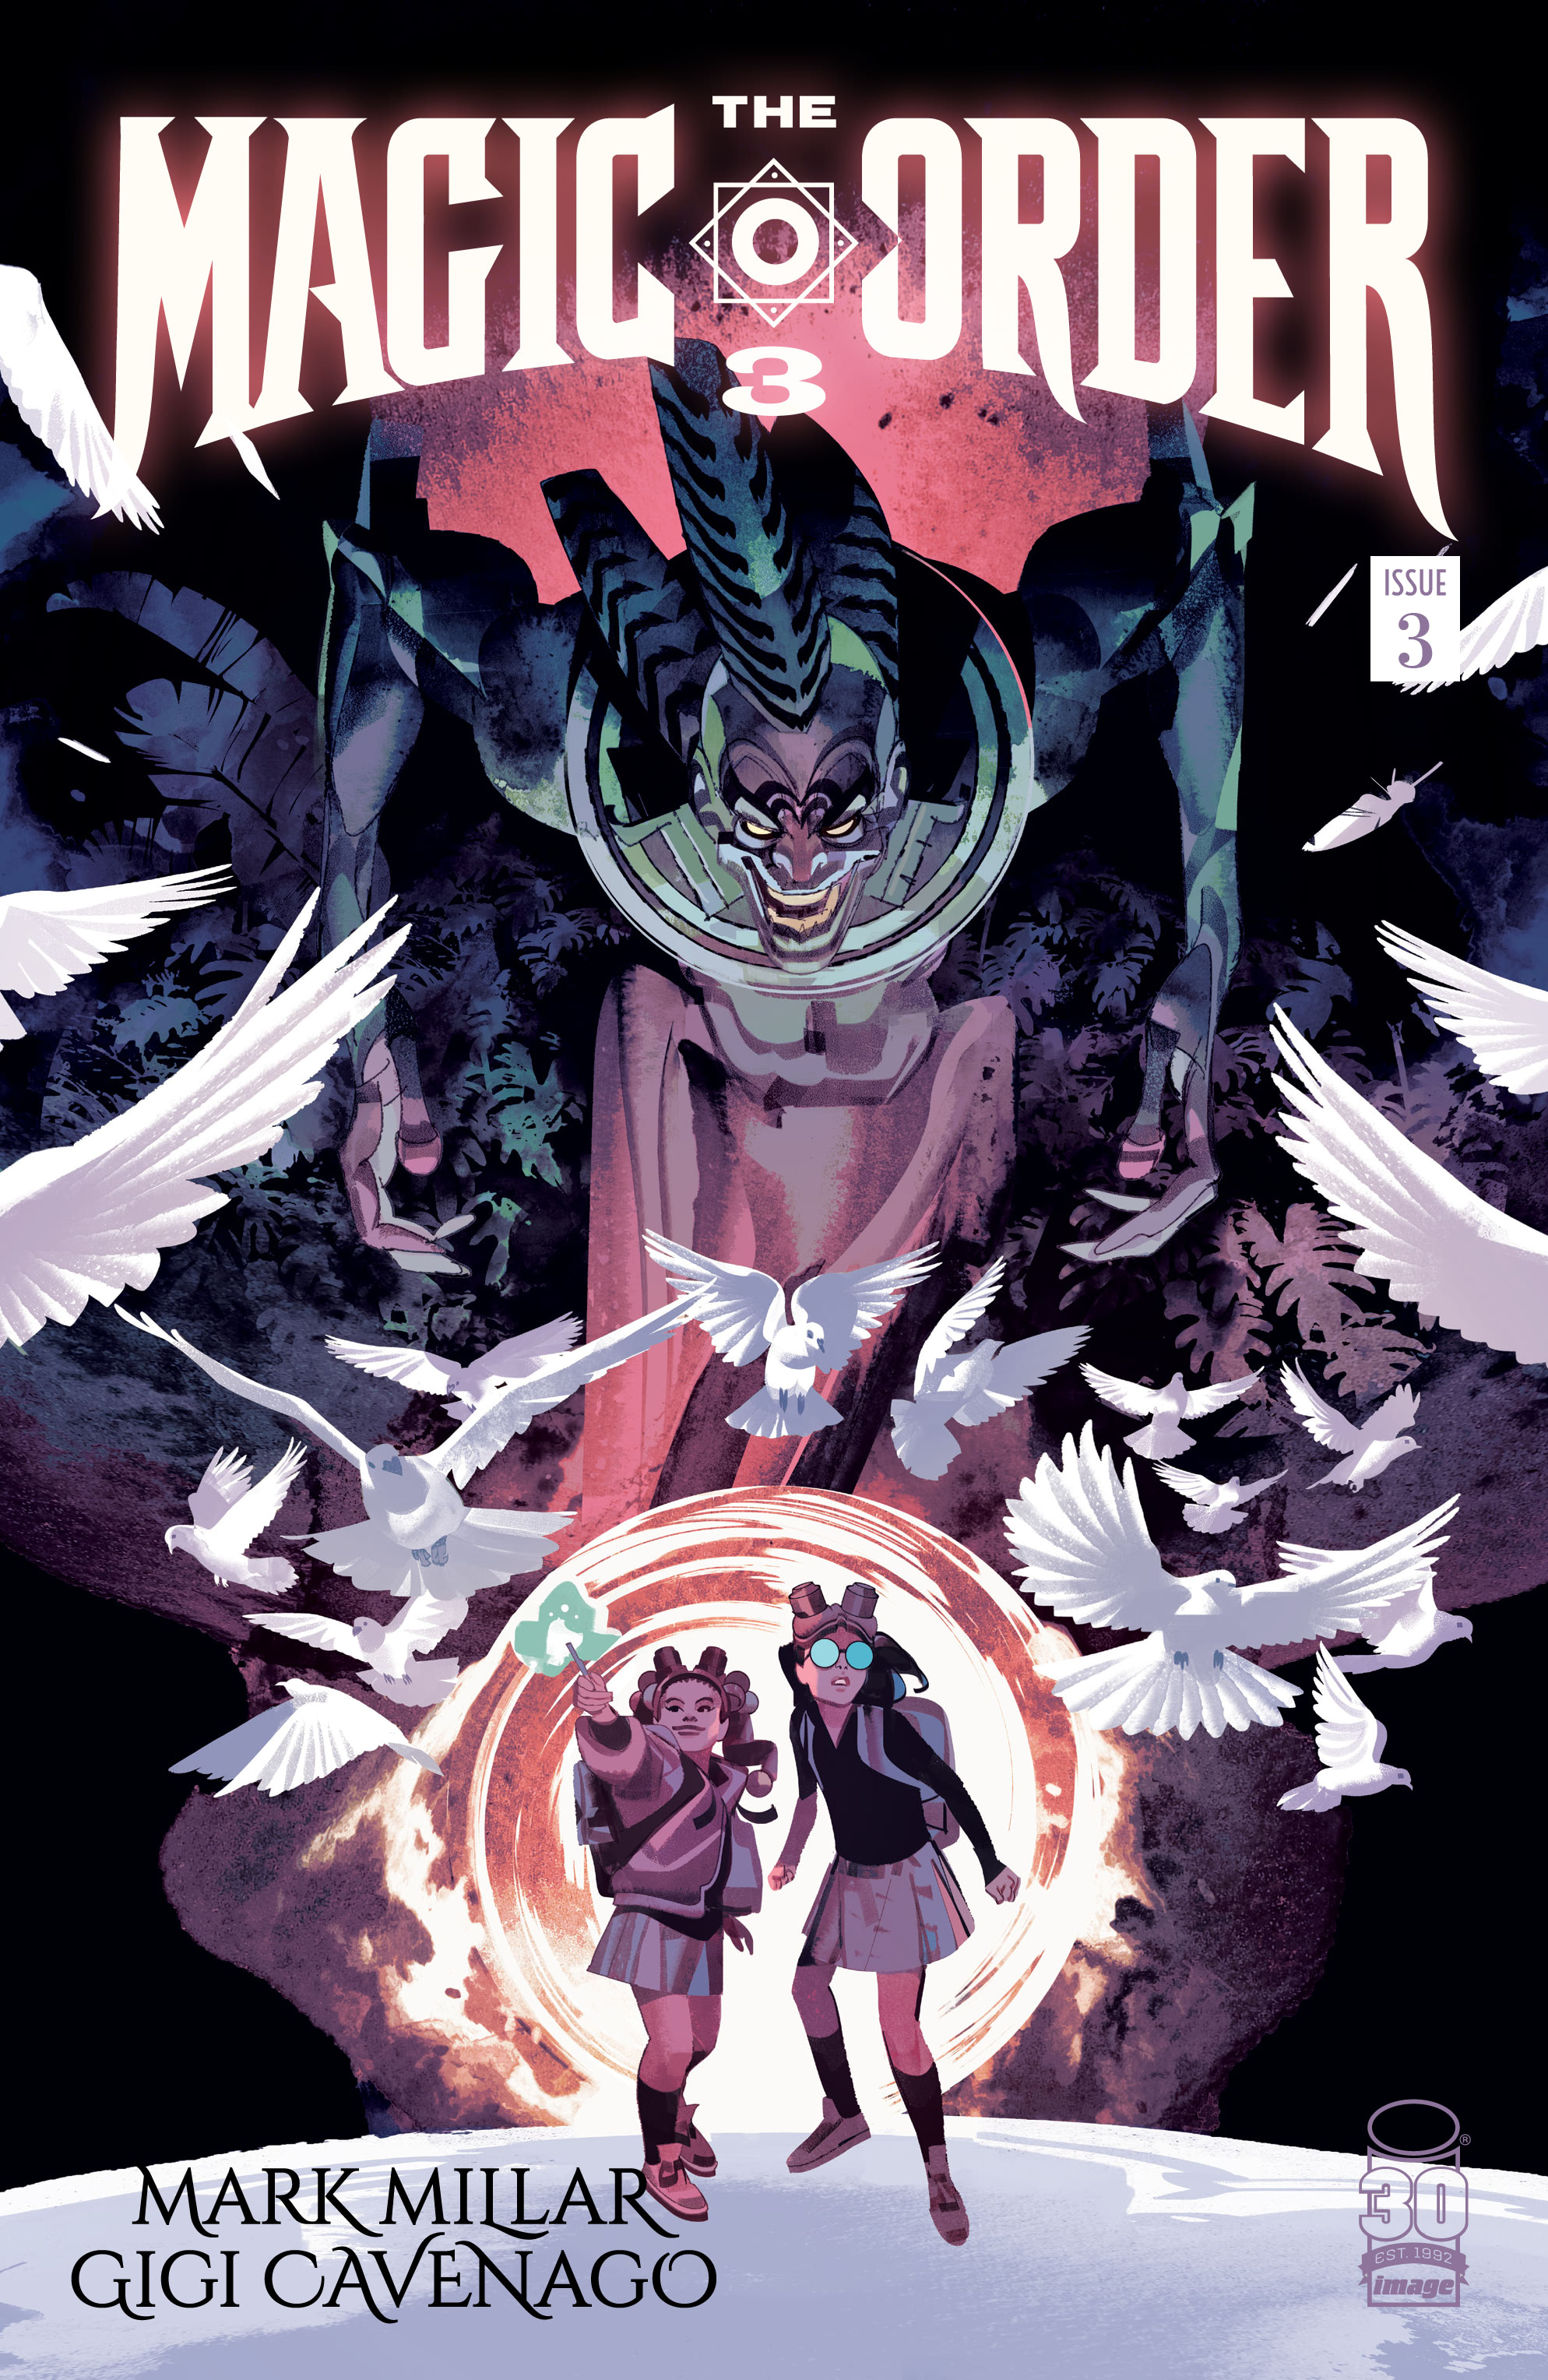 The Magic Order 3 Issue 3 | Read The Magic Order 3 Issue 3 comic 